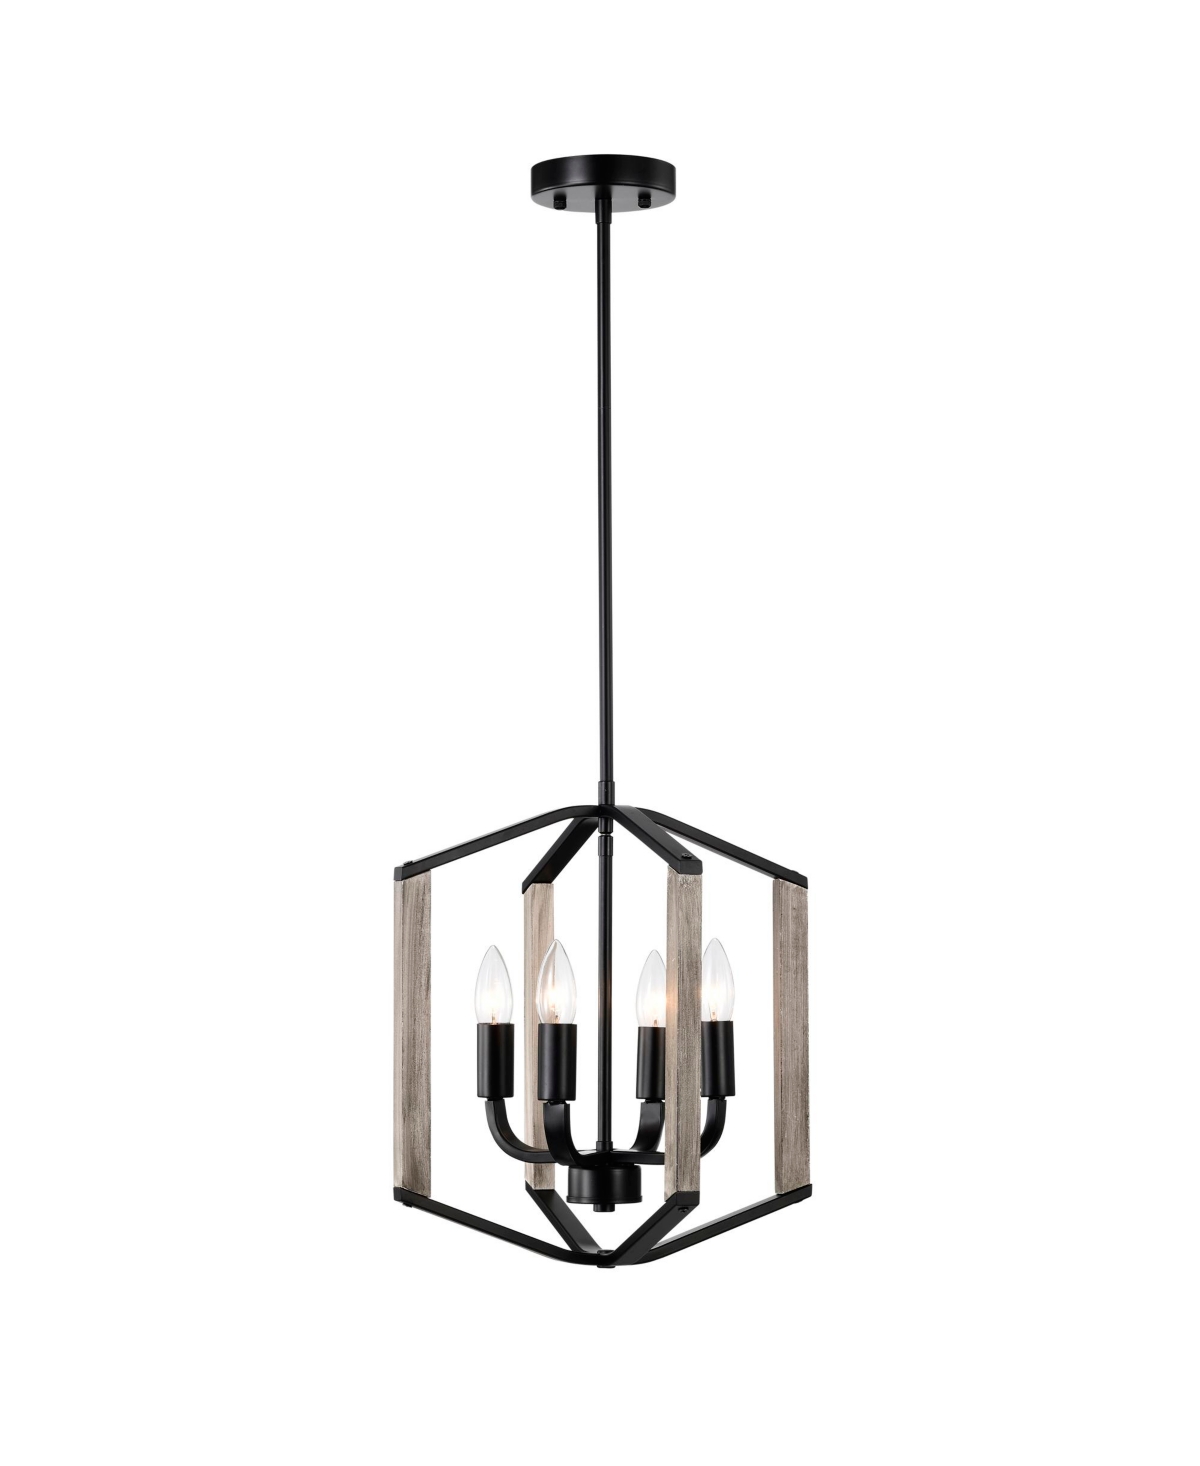 Home Accessories Miner 14" 4-light Indoor Finish Chandelier With Light Kit In Matte Black And Faux Wood Grain